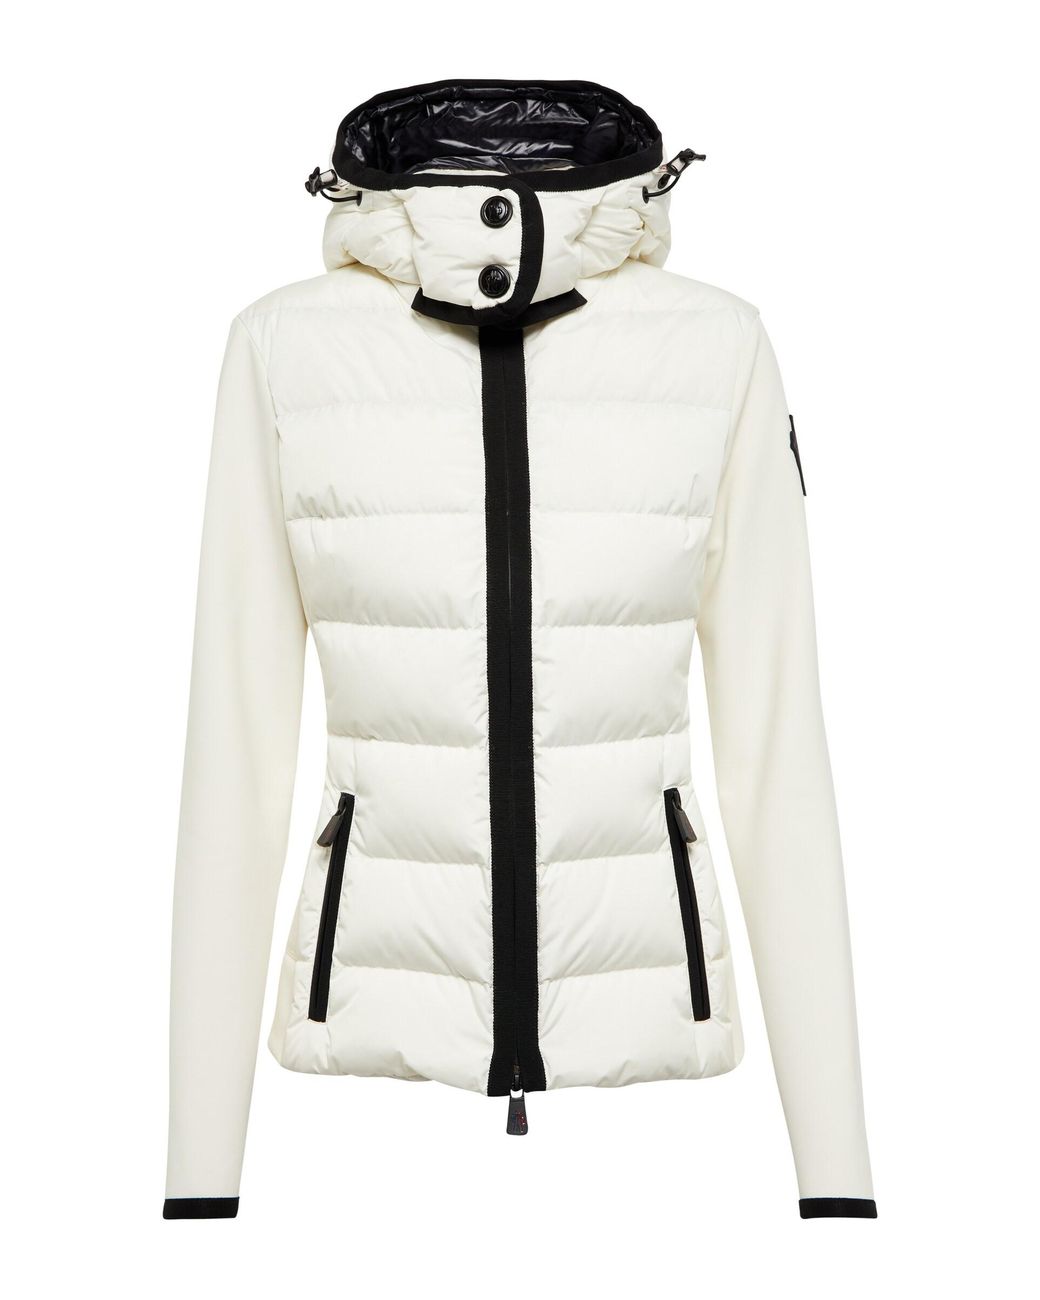 3 MONCLER GRENOBLE Maglia Down-paneled Jacket in White | Lyst